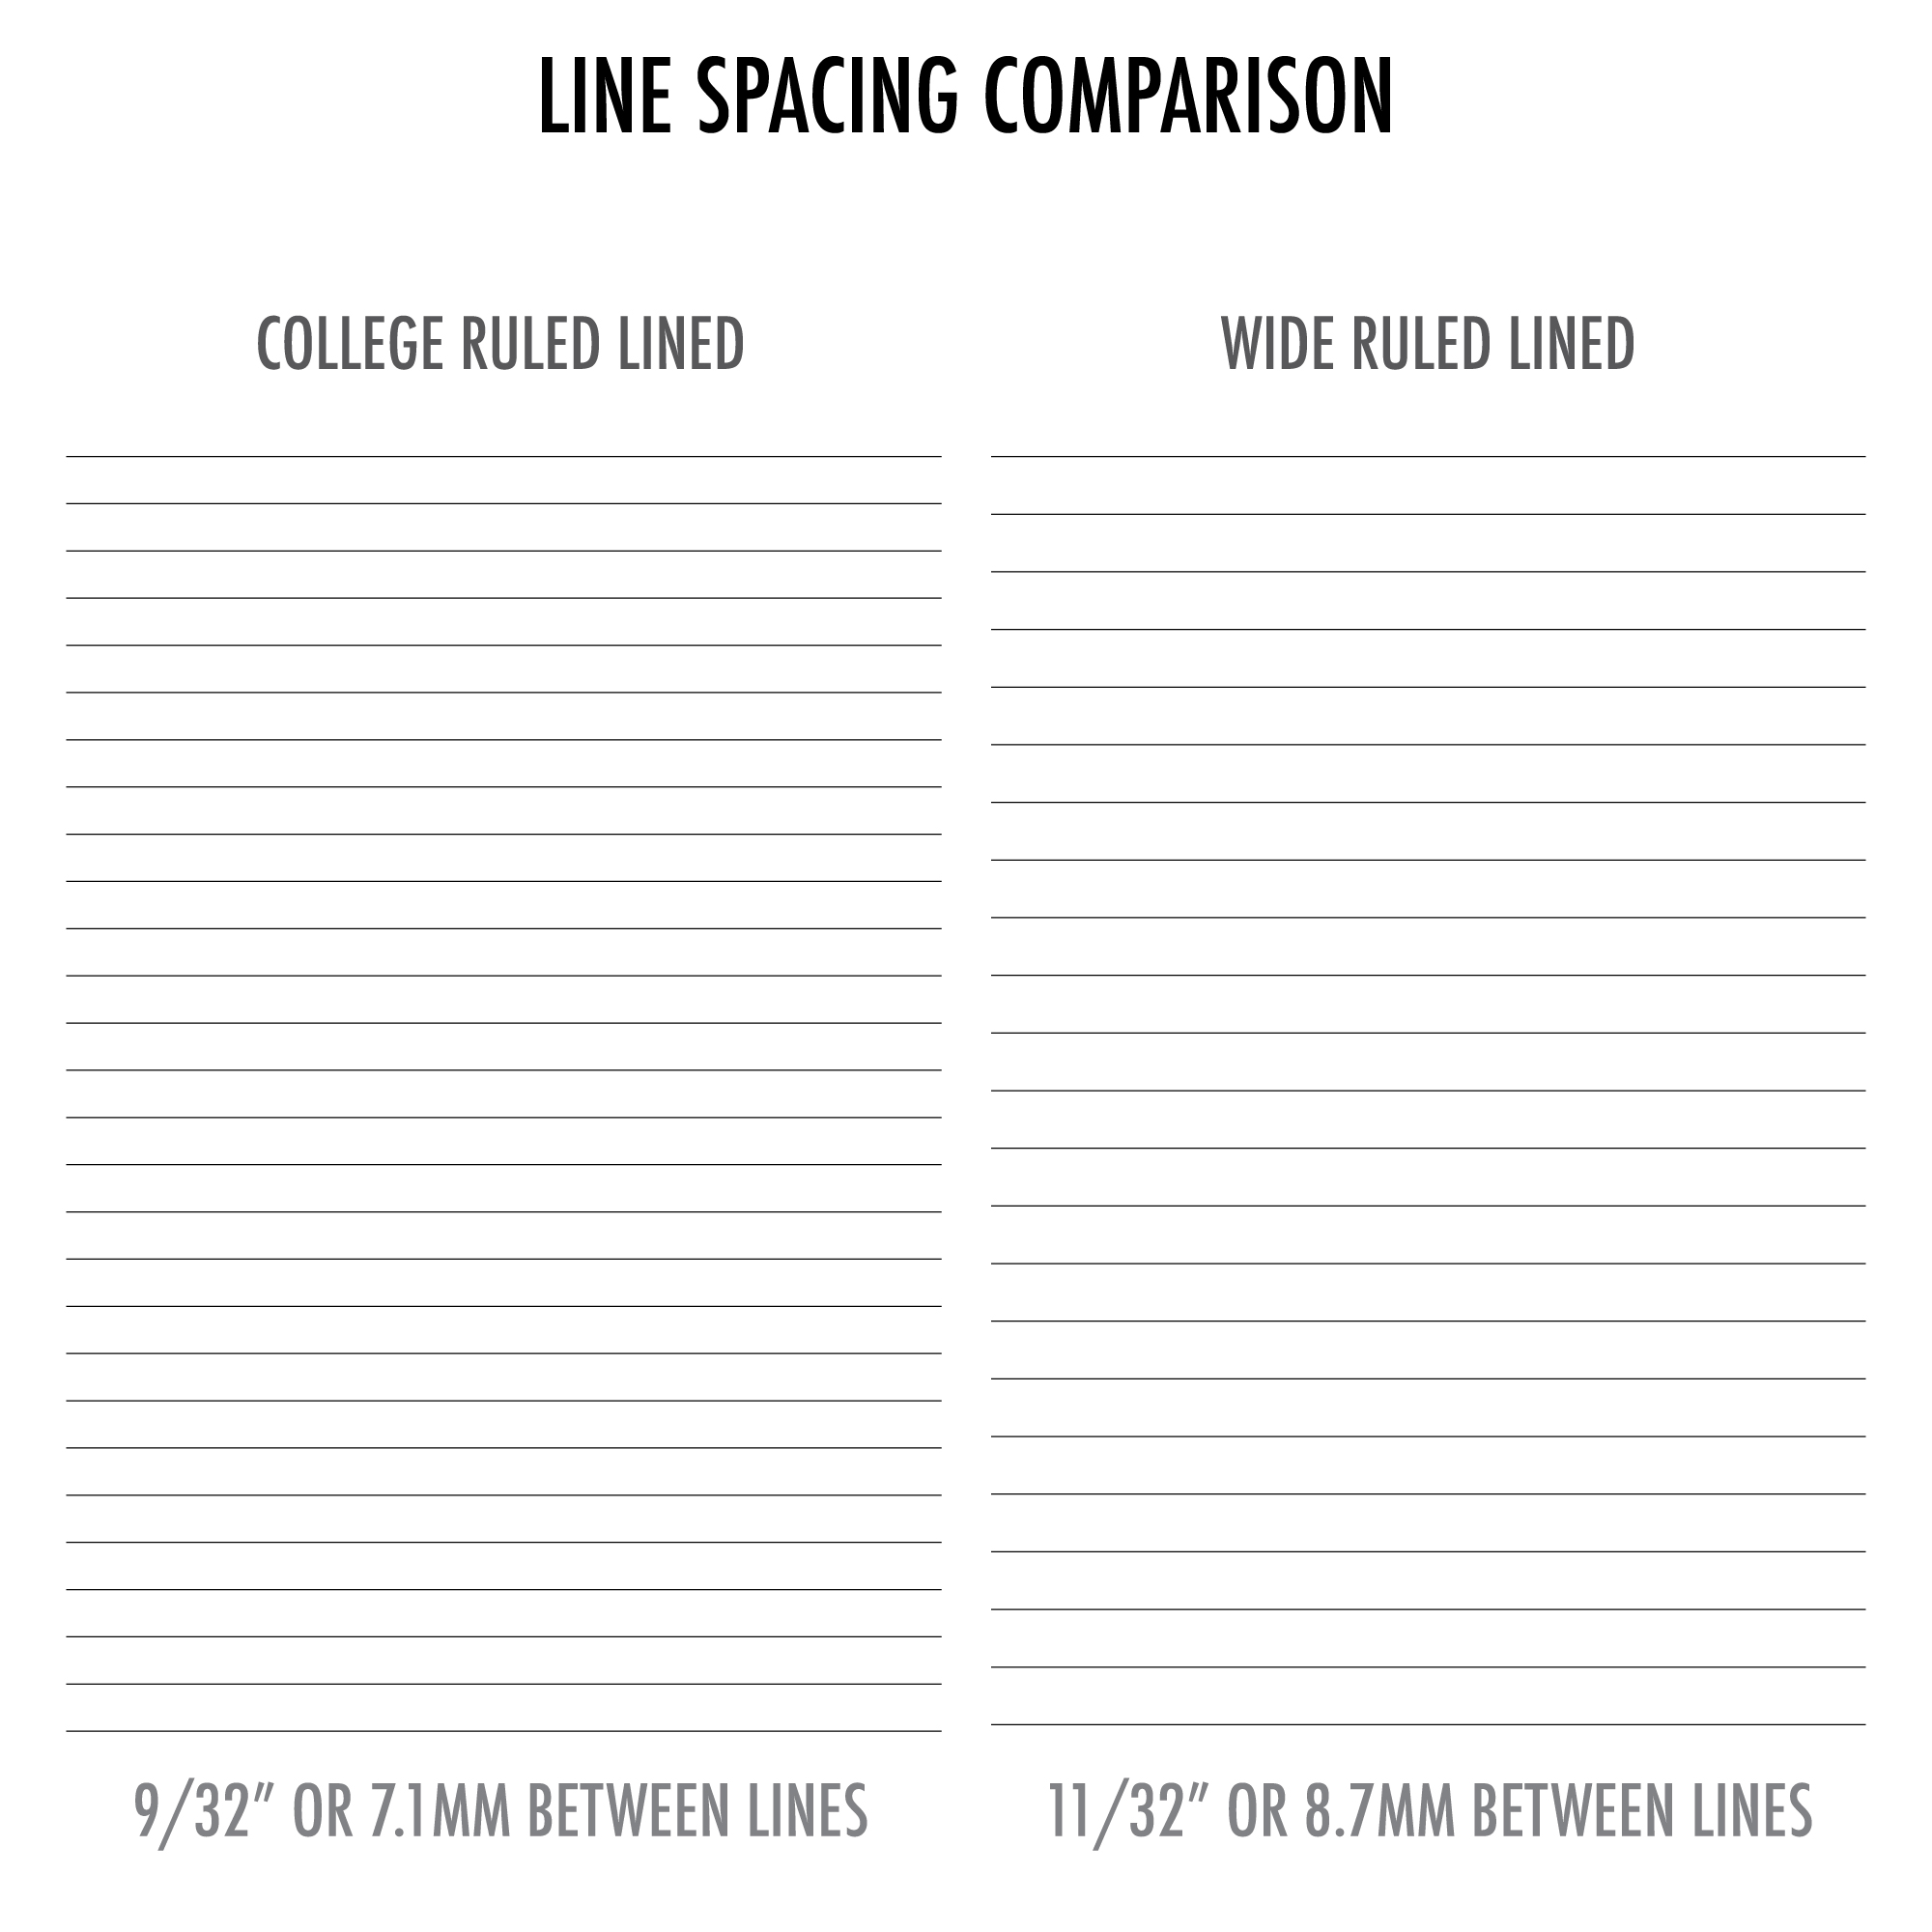 Lined spacing comparison college wide ruled